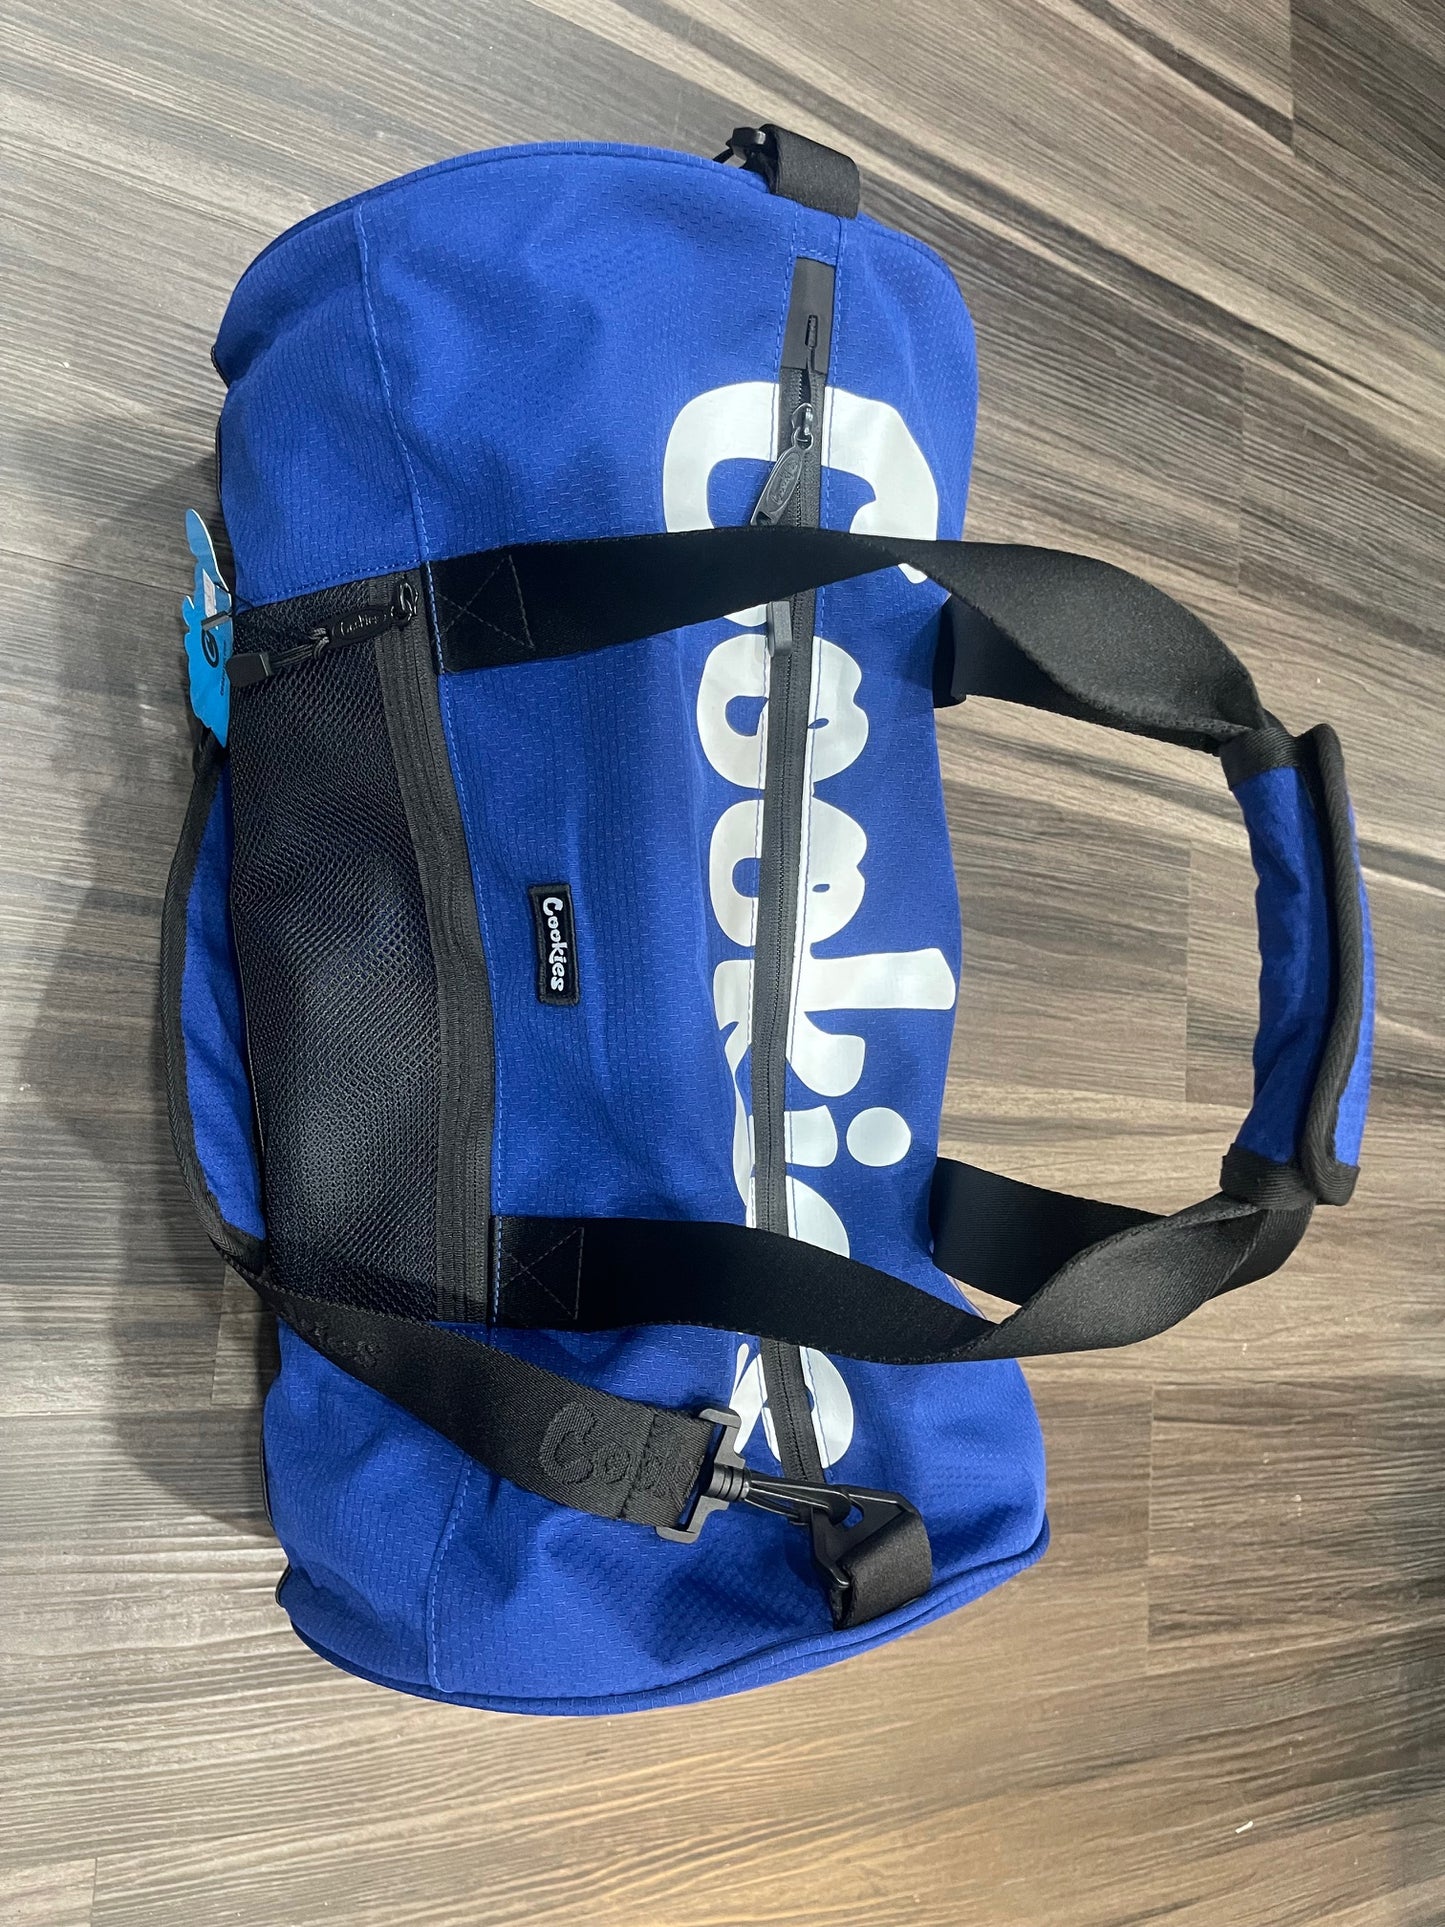 Cookies SF "Summit Ripstop" smell proof duffle bag with oversize logo print